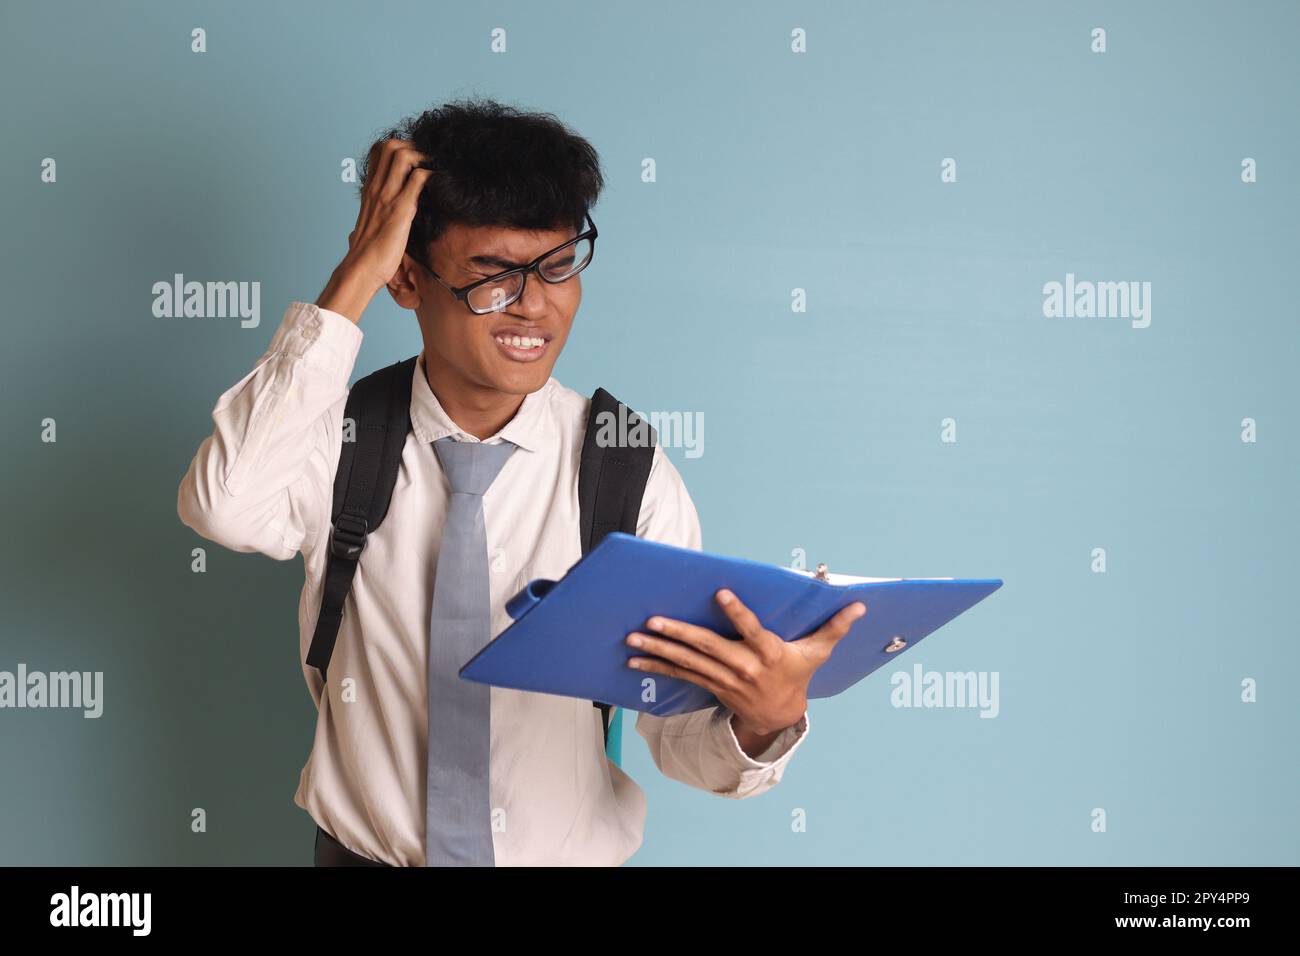 Indonesian senior high school student wearing white shirt uniform with gray tie writing on note book using pen and thinking about an idea. Isolated im Stock Photo